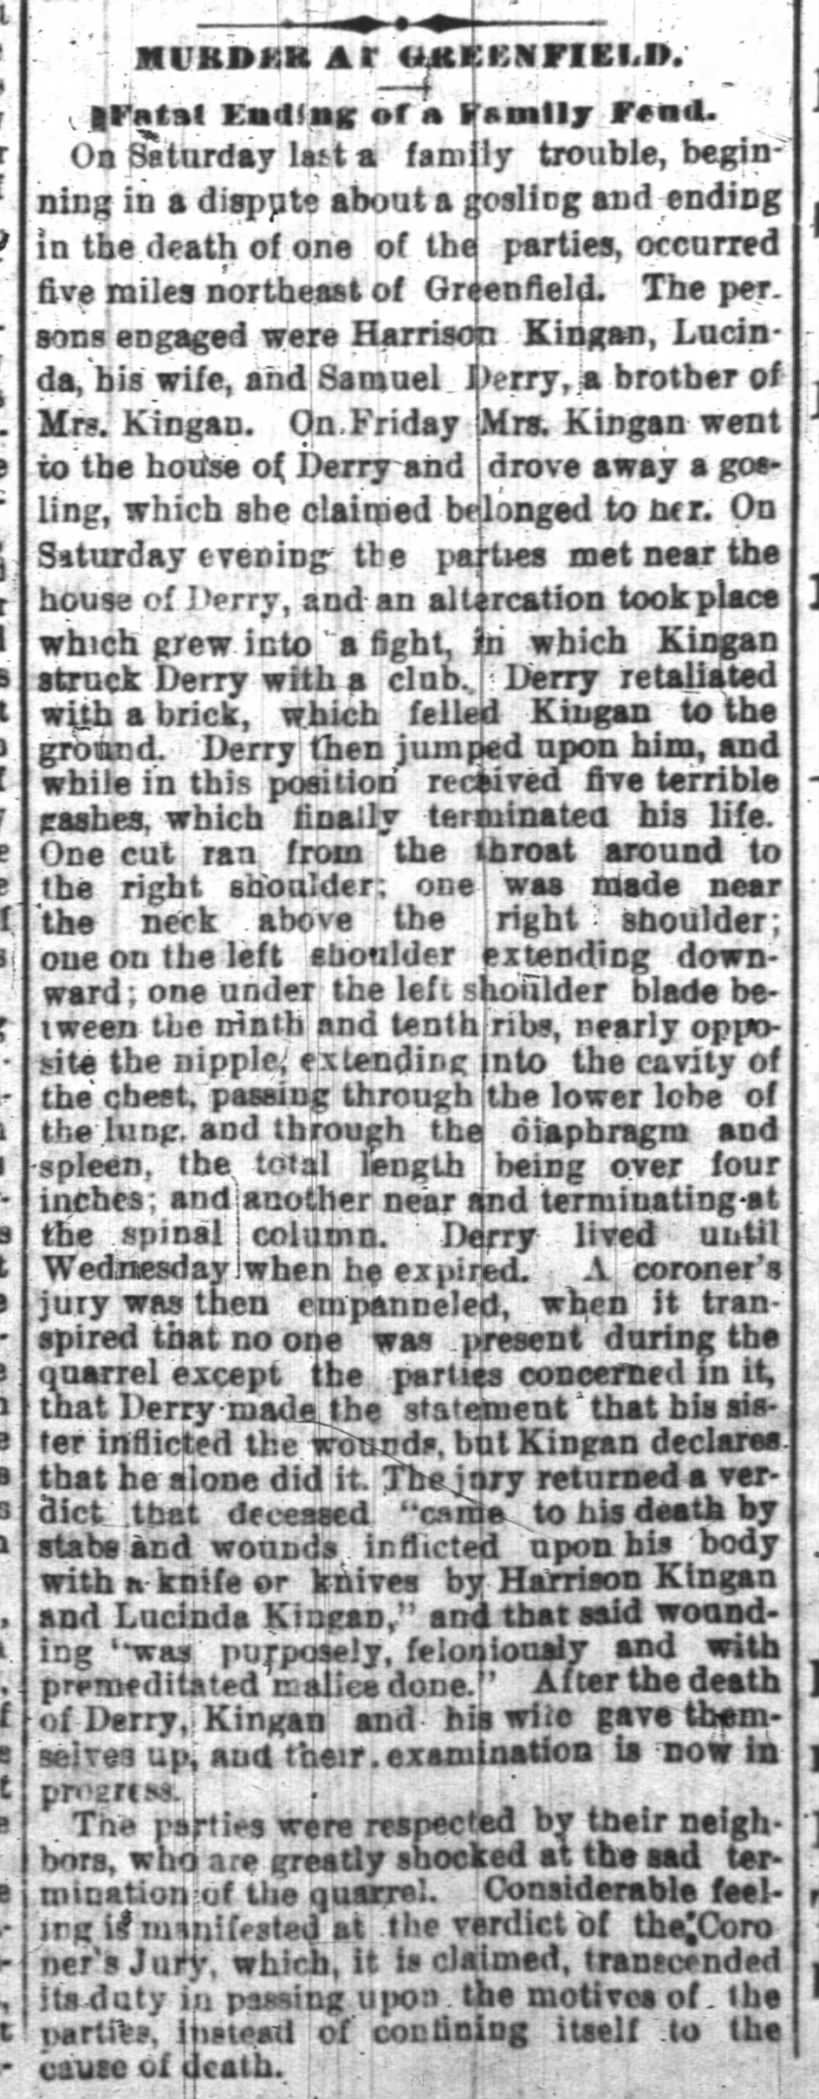 The Indianapolis News 2 Aug 1873 page 1 col 5 Derry Murder